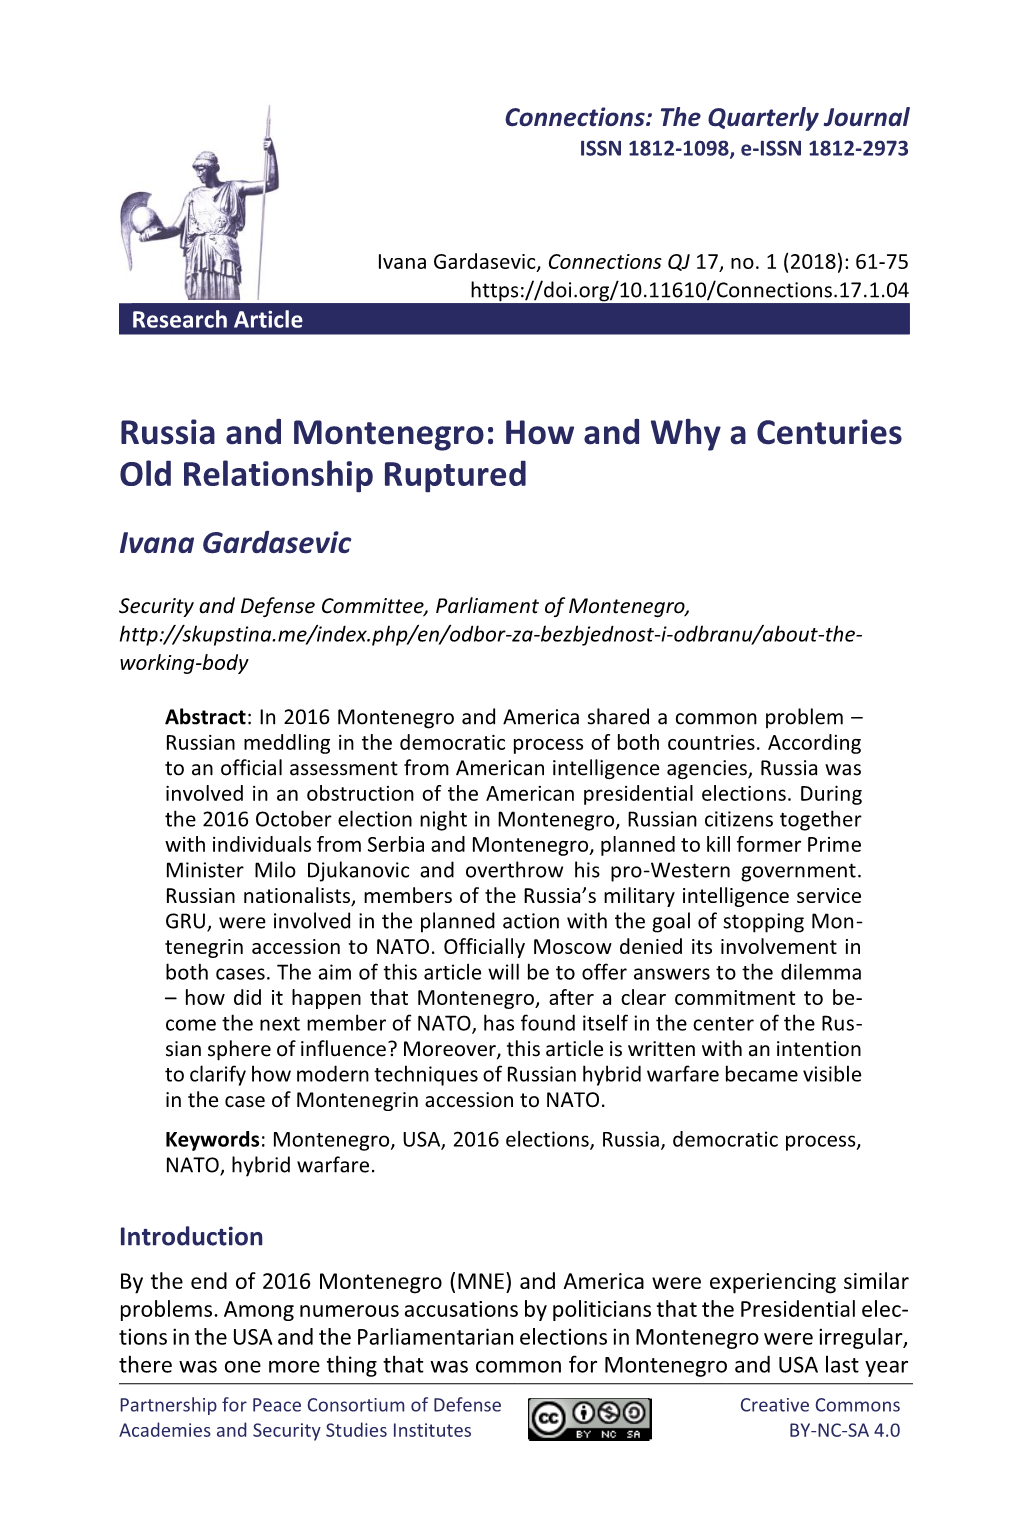 Russia and Montenegro: How and Why a Centuries Old Relationship Ruptured